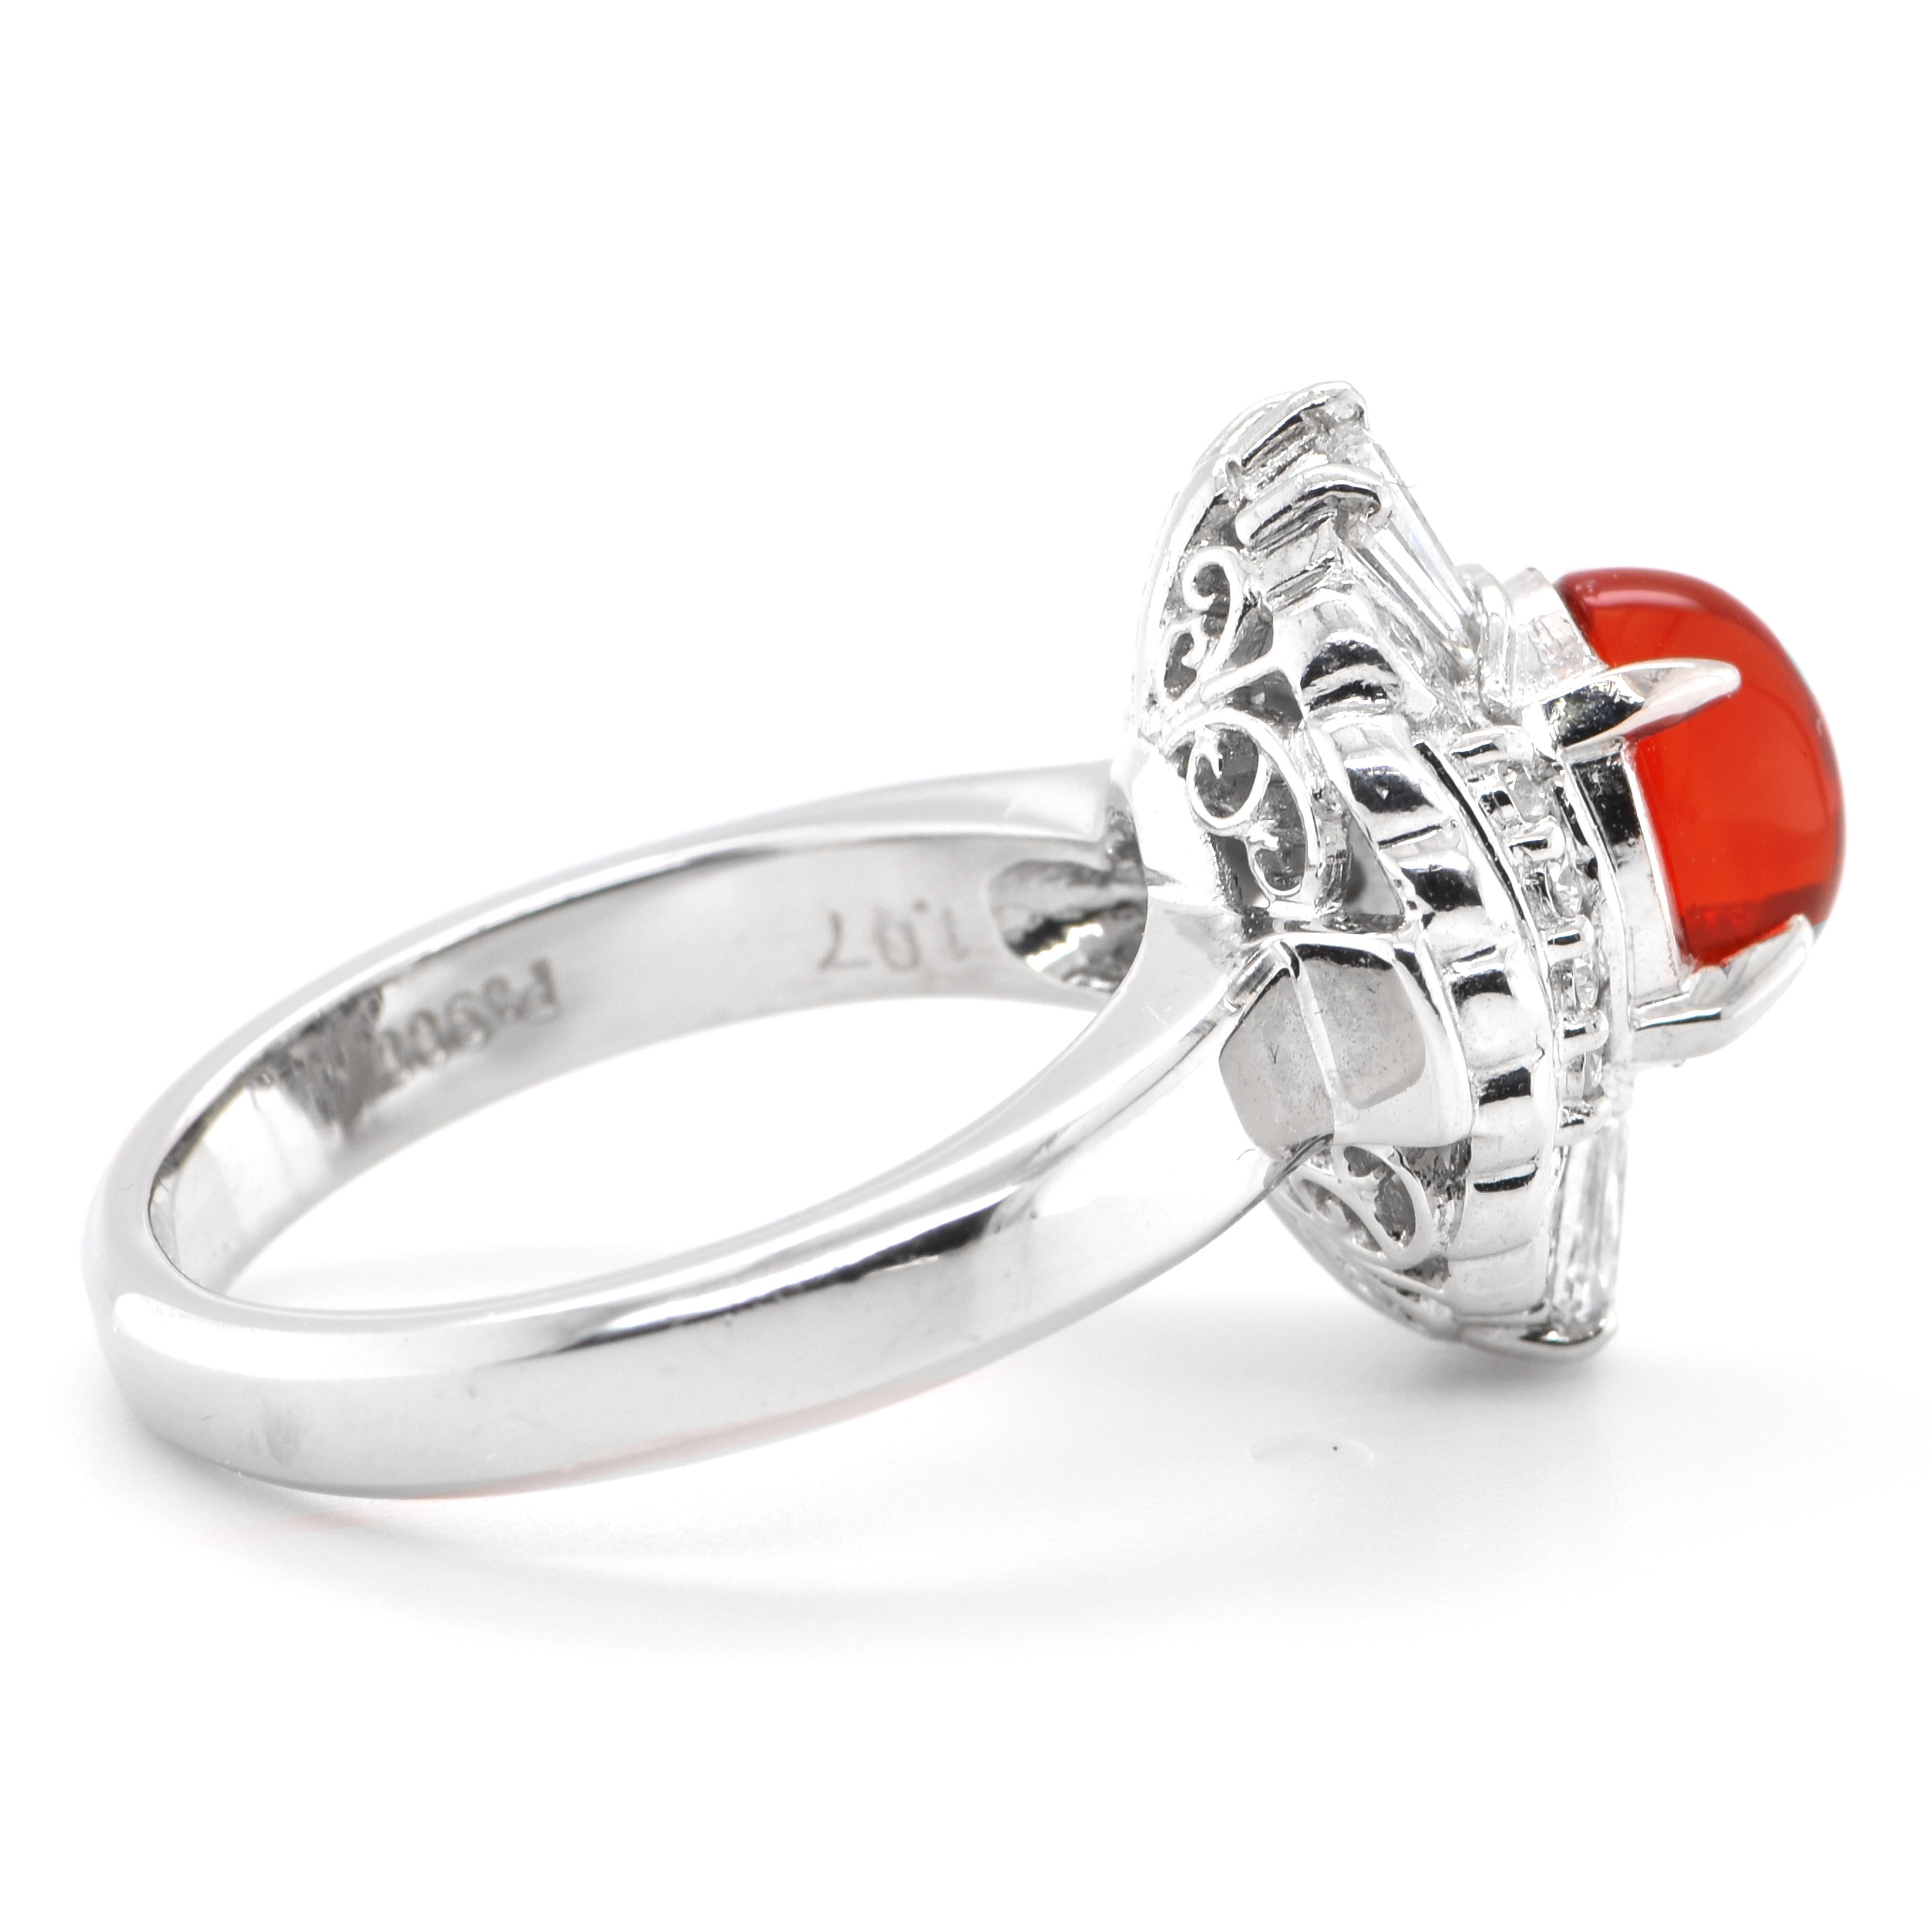 Cabochon 1.07 Carat Natural Fire Opal and Diamond Vintage Ring Set in Platinum For Sale